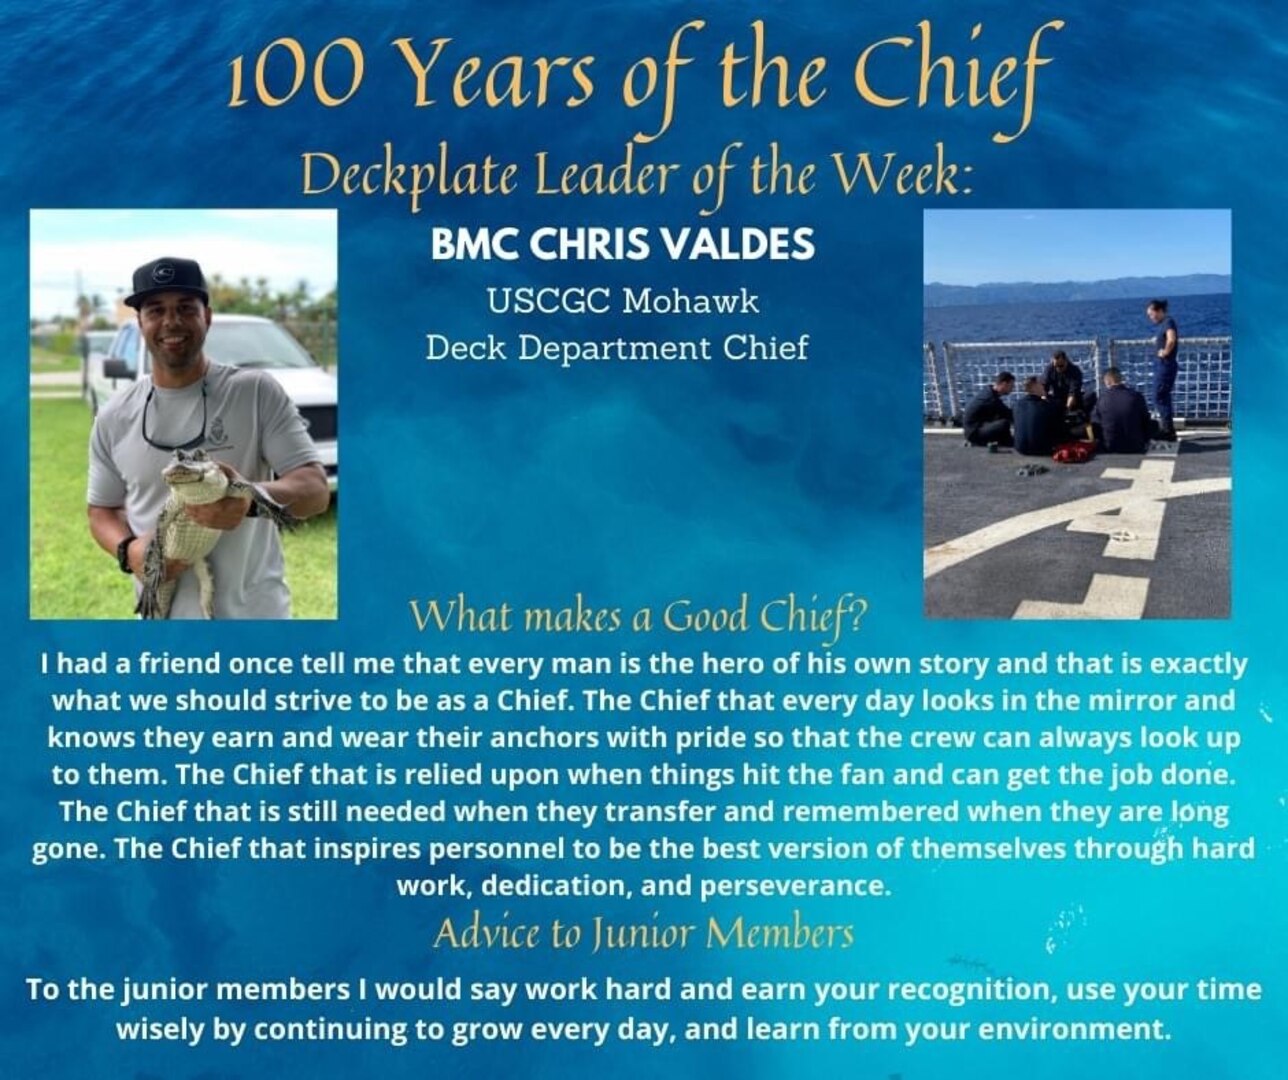 Our deckplate leader of the week is Chief Petty Officer Christopher Valdes, a boatswains mate aboard the U.S. Coast Guard Cutter Mohawk.